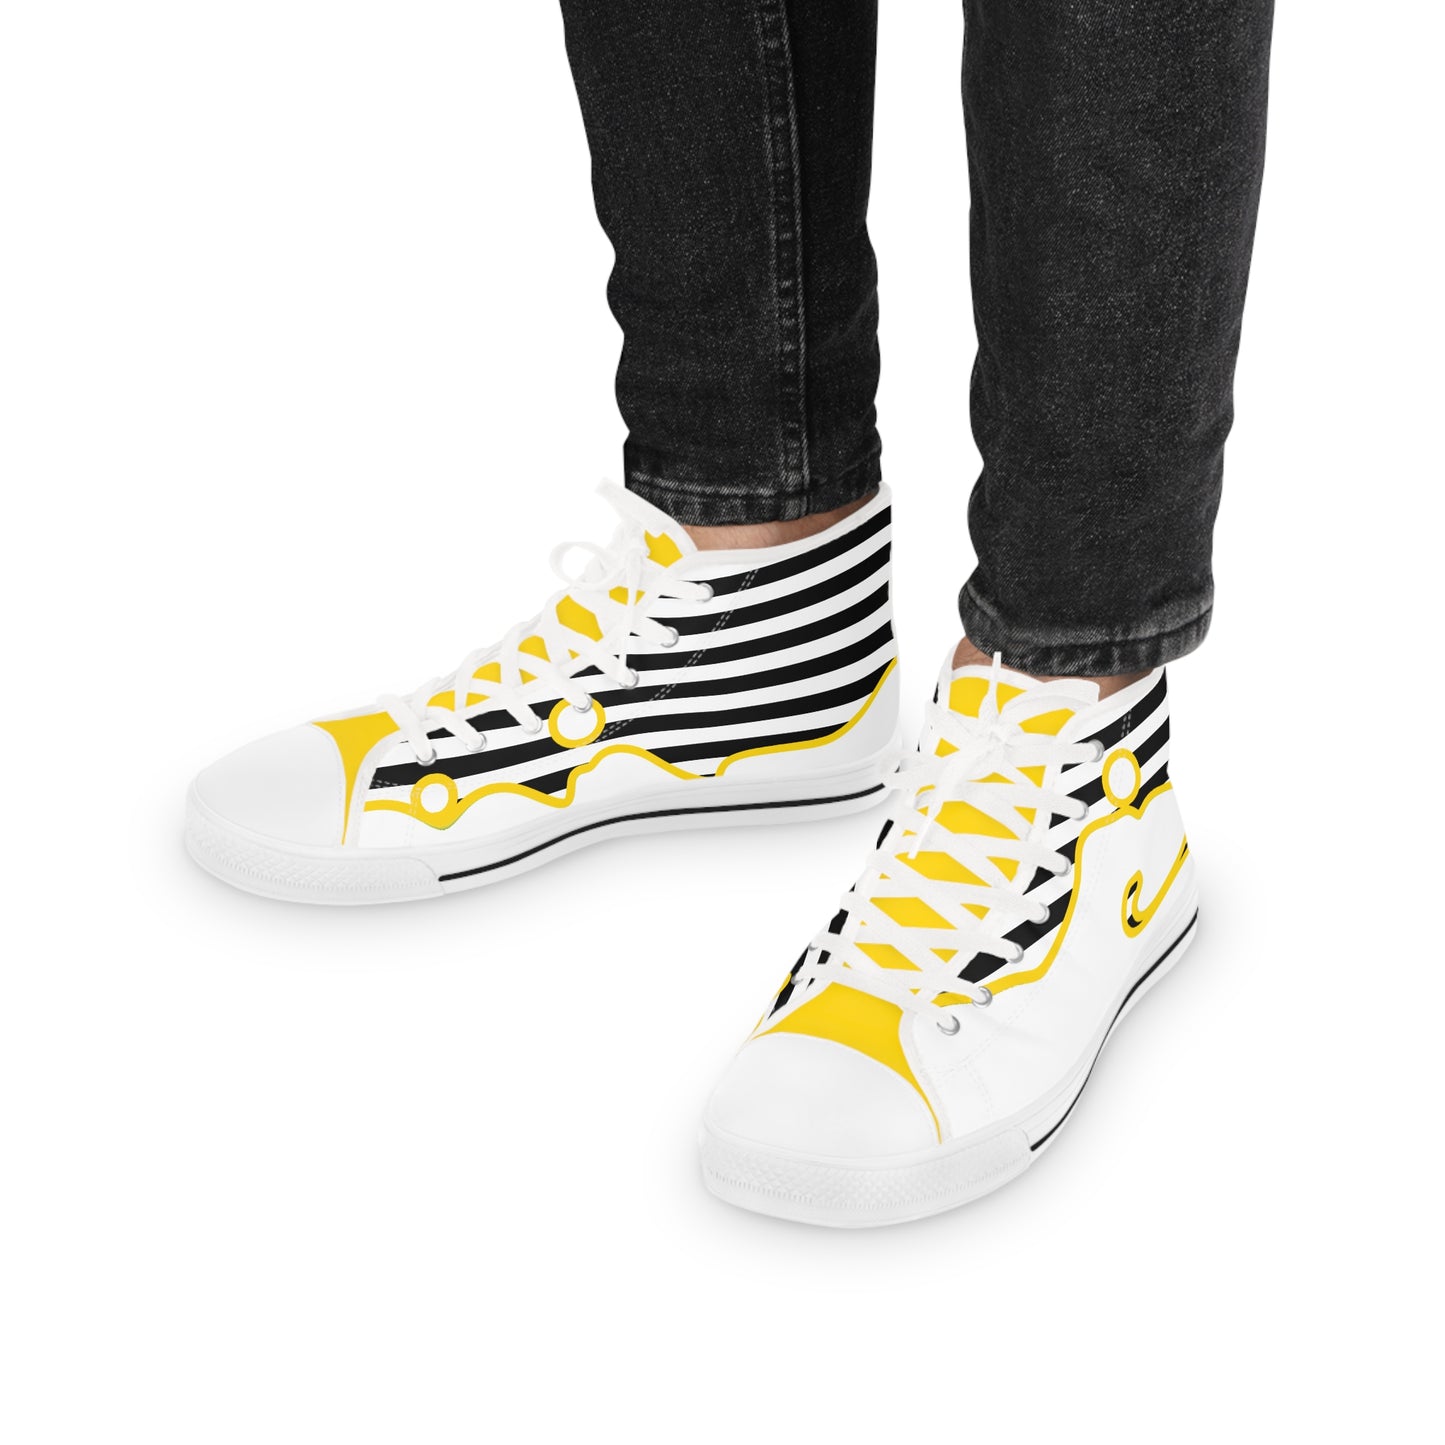 Men's High Top Graphics Sneakers - 10002 US 14 White sole